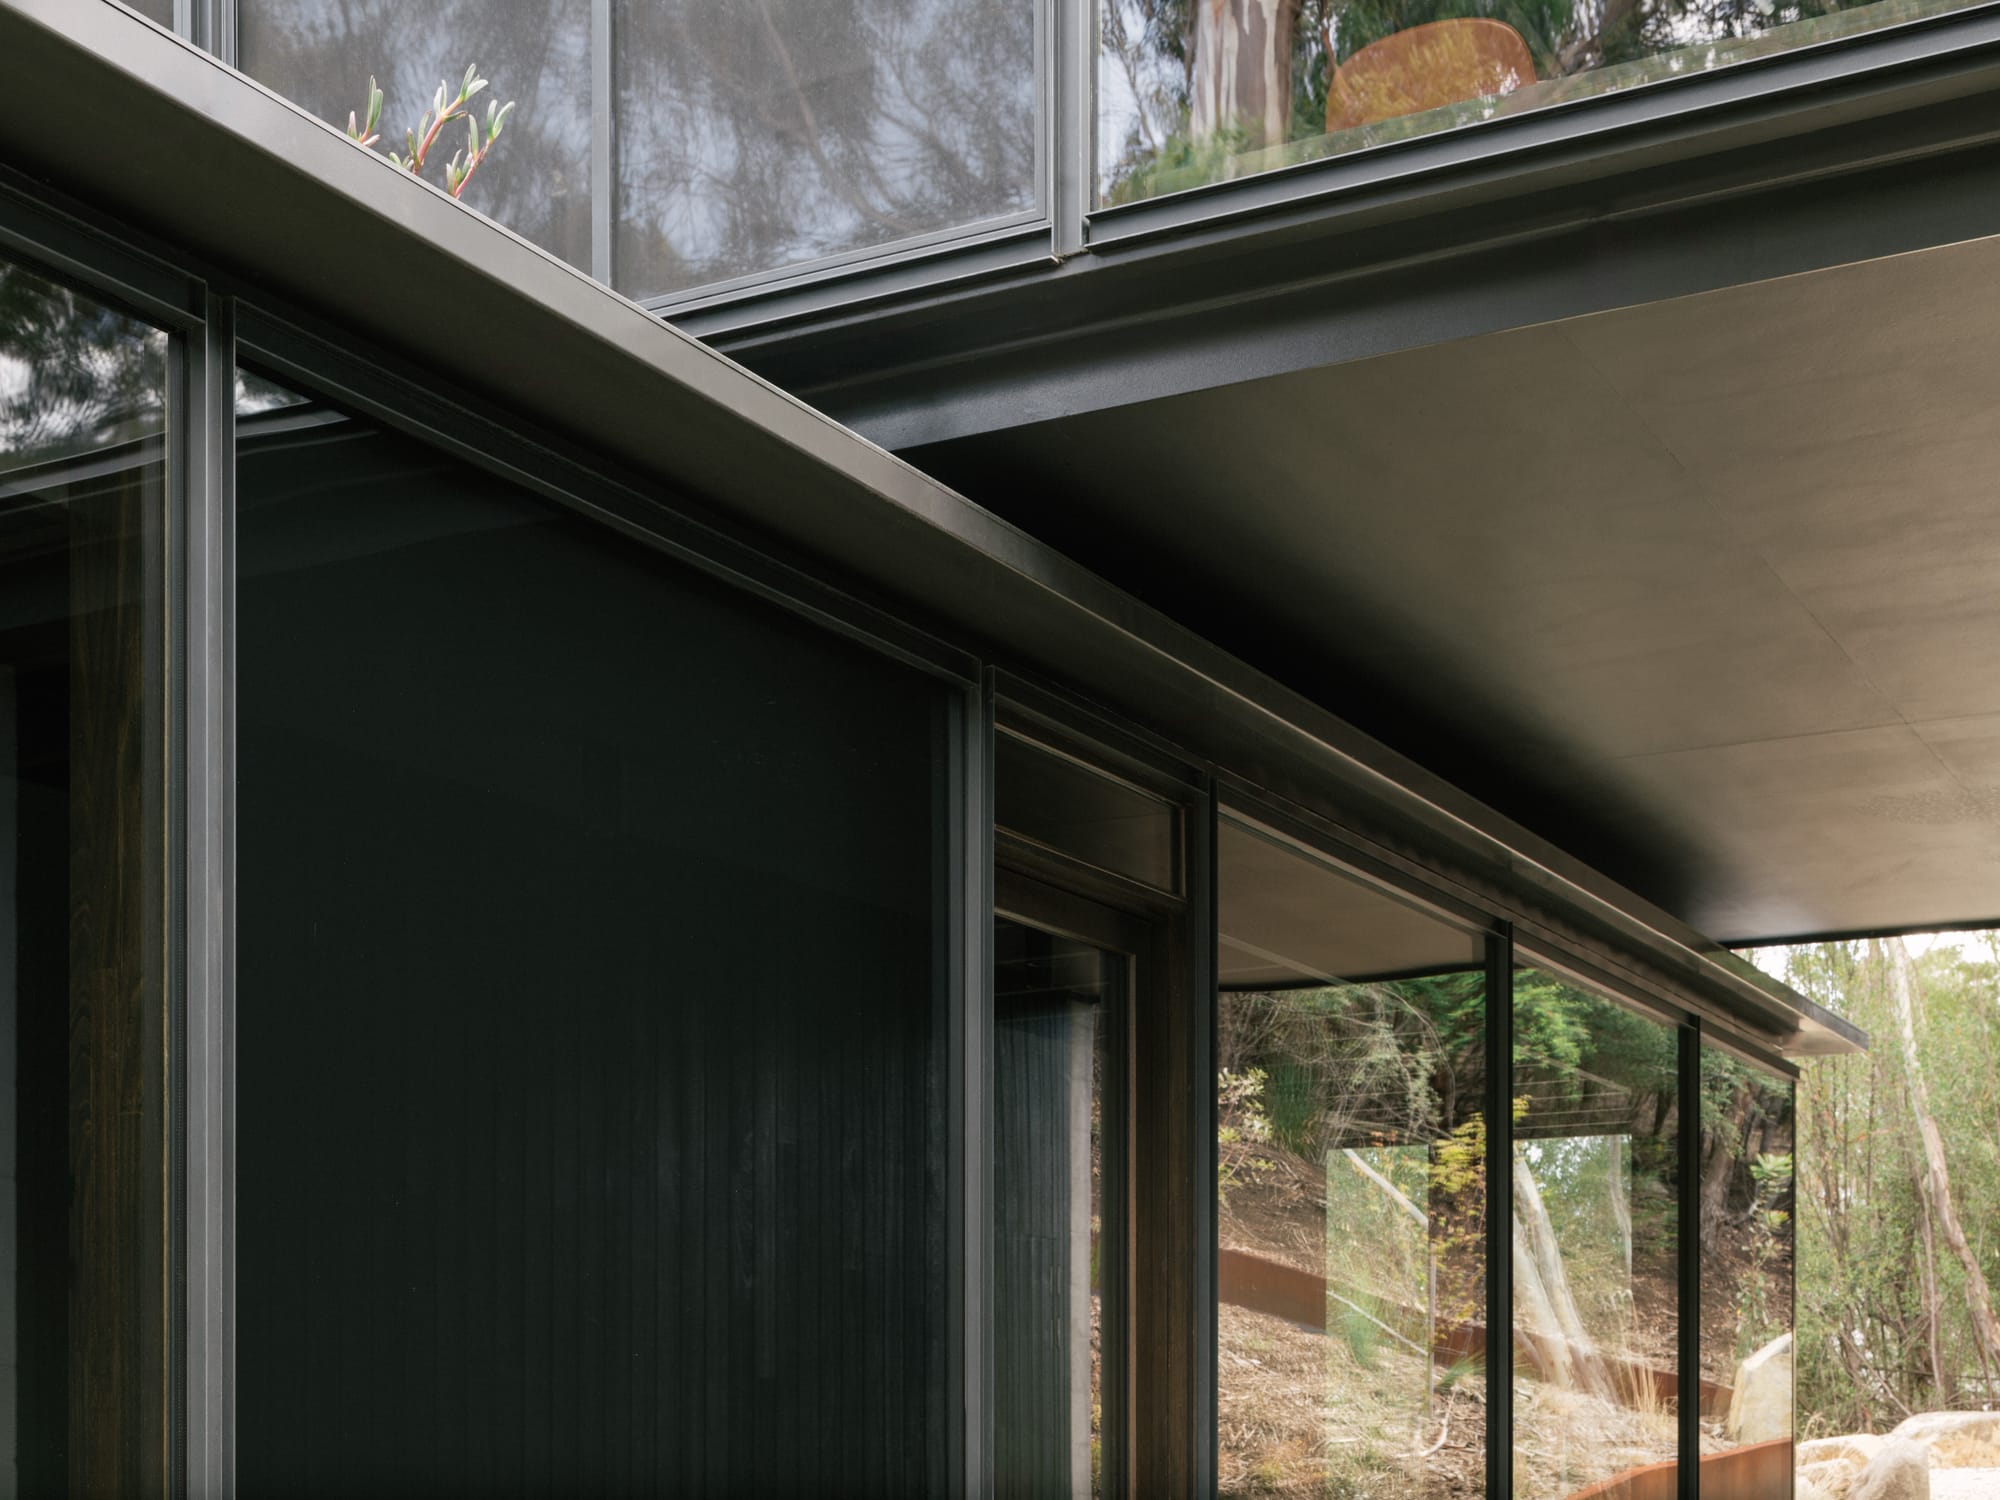 Taroona House by Archier. Photography by Thurston Empson. Close up shot of join between two separate rectangular structures made of timber and metal.